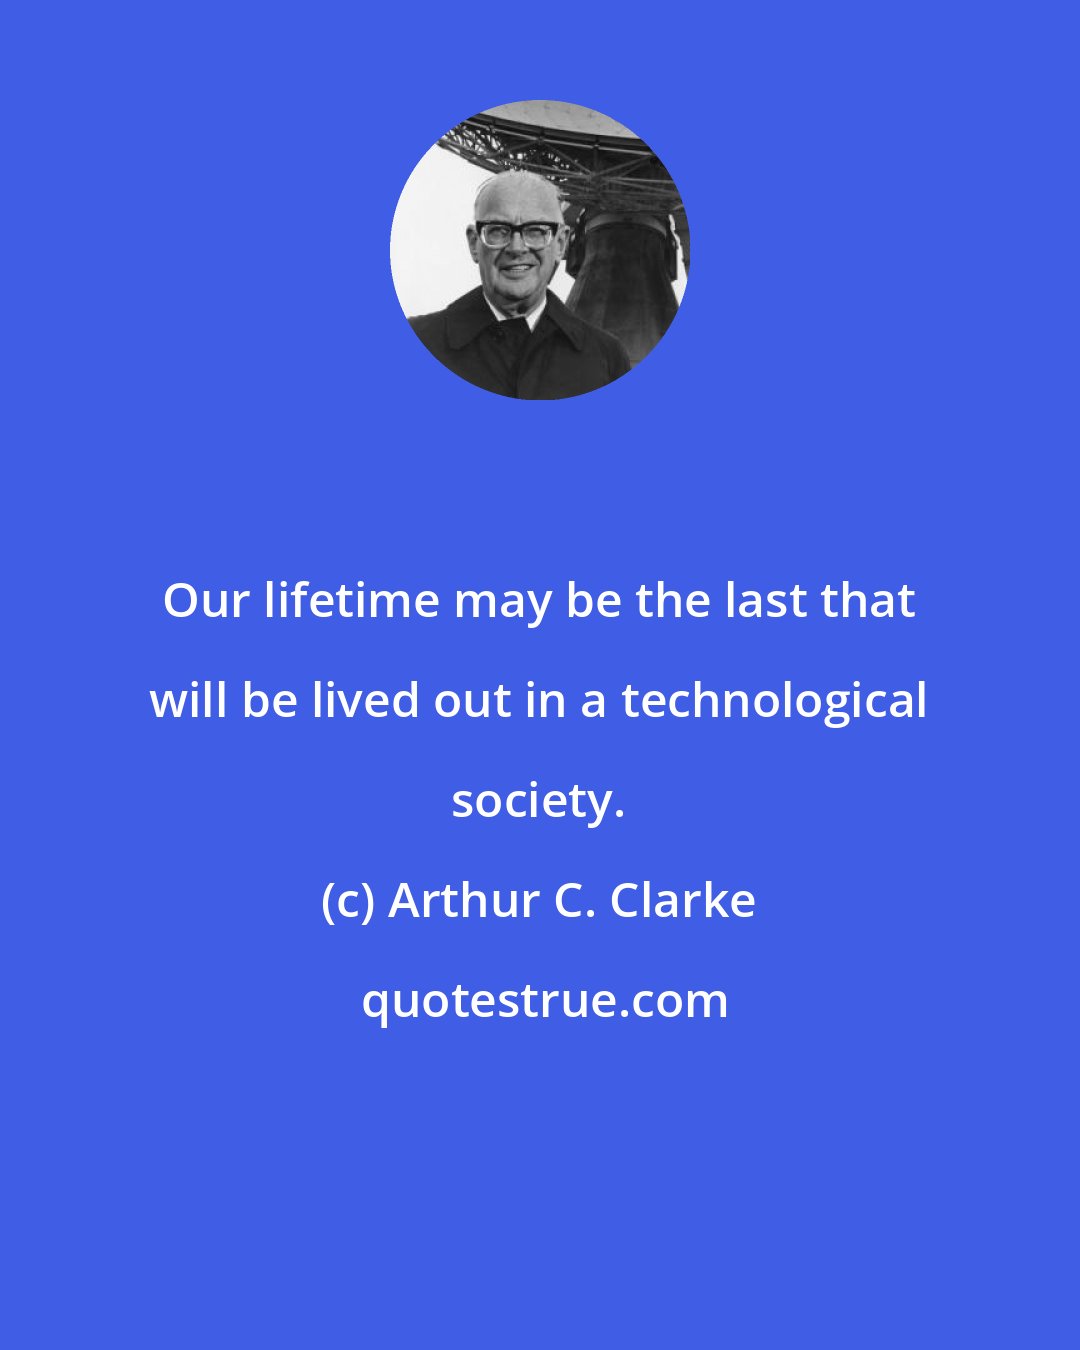 Arthur C. Clarke: Our lifetime may be the last that will be lived out in a technological society.